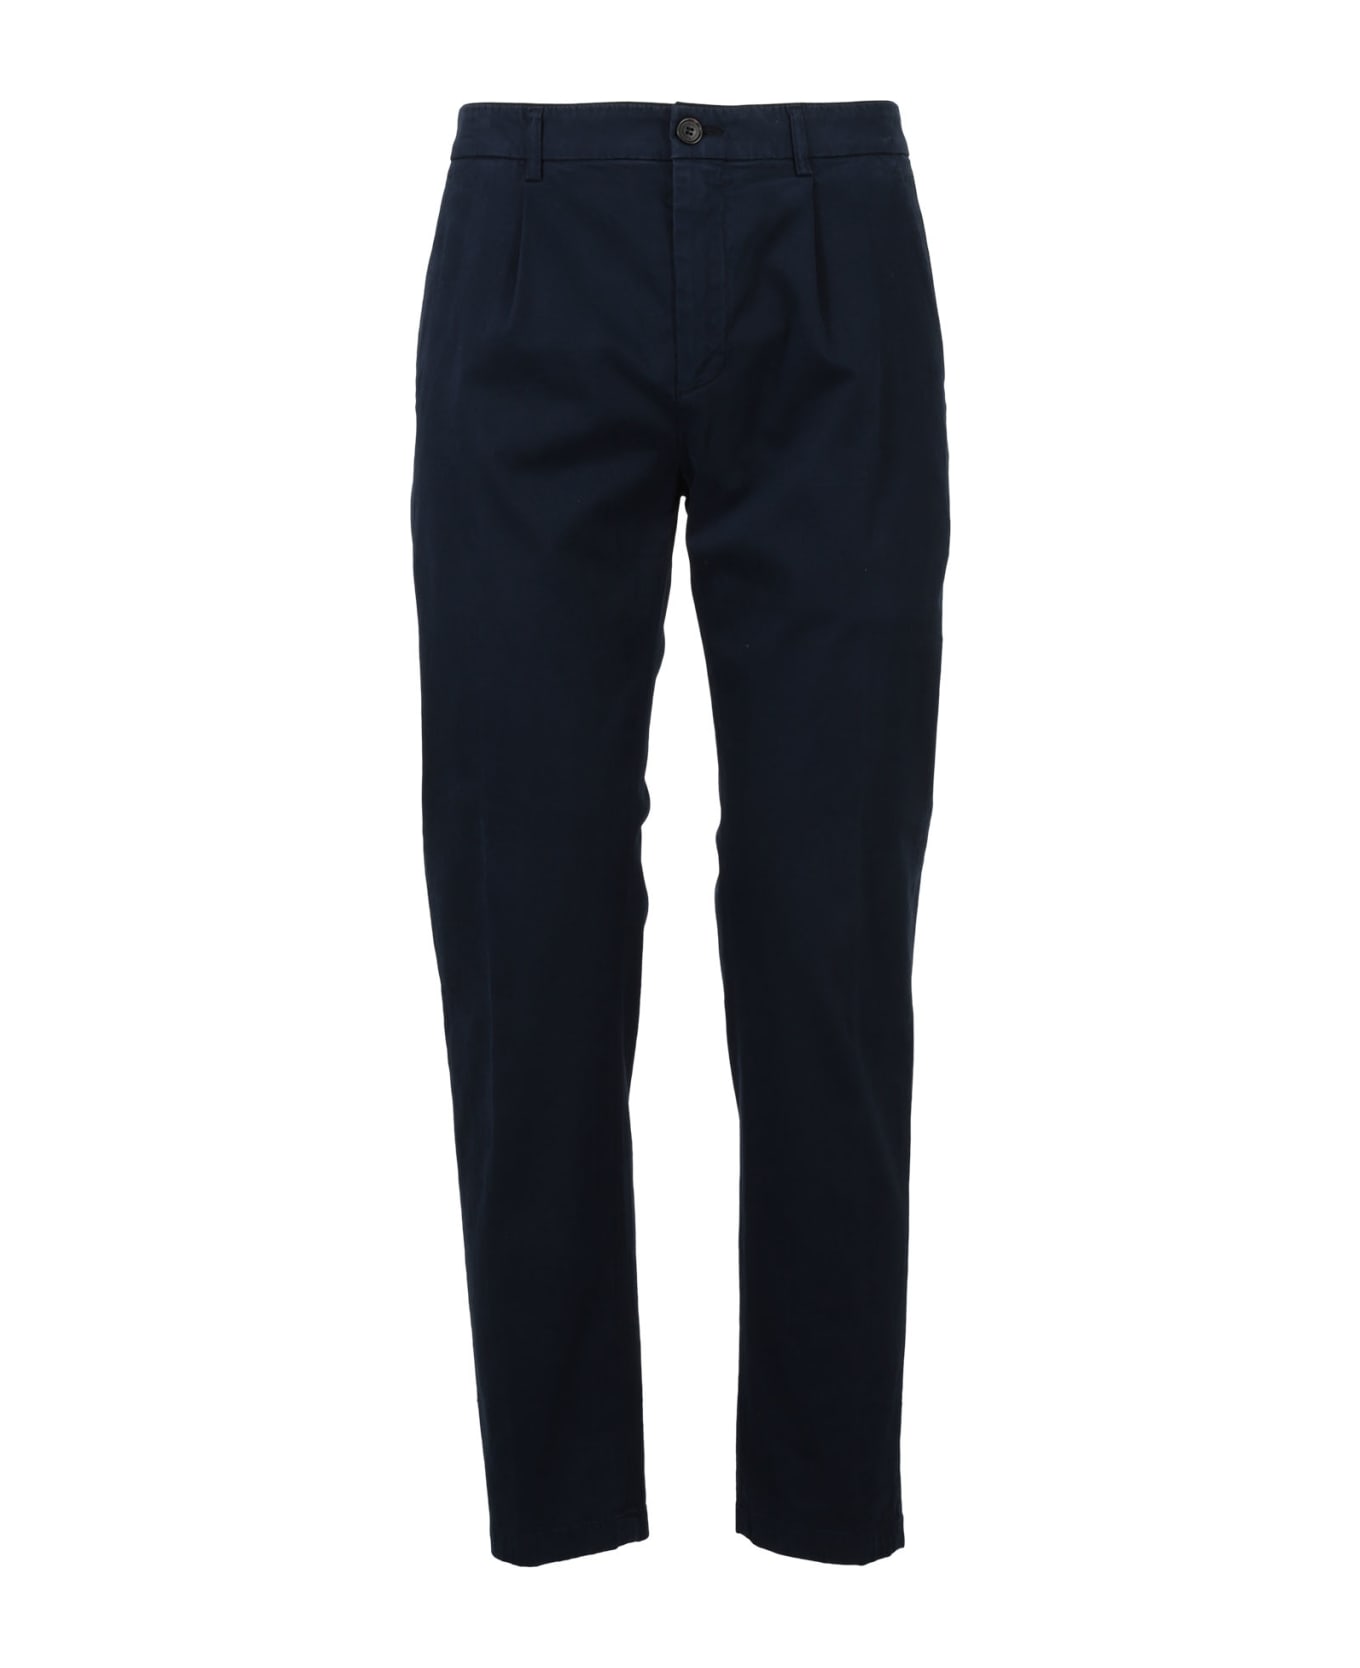 Department Five Prince Pences Chinos - Navy